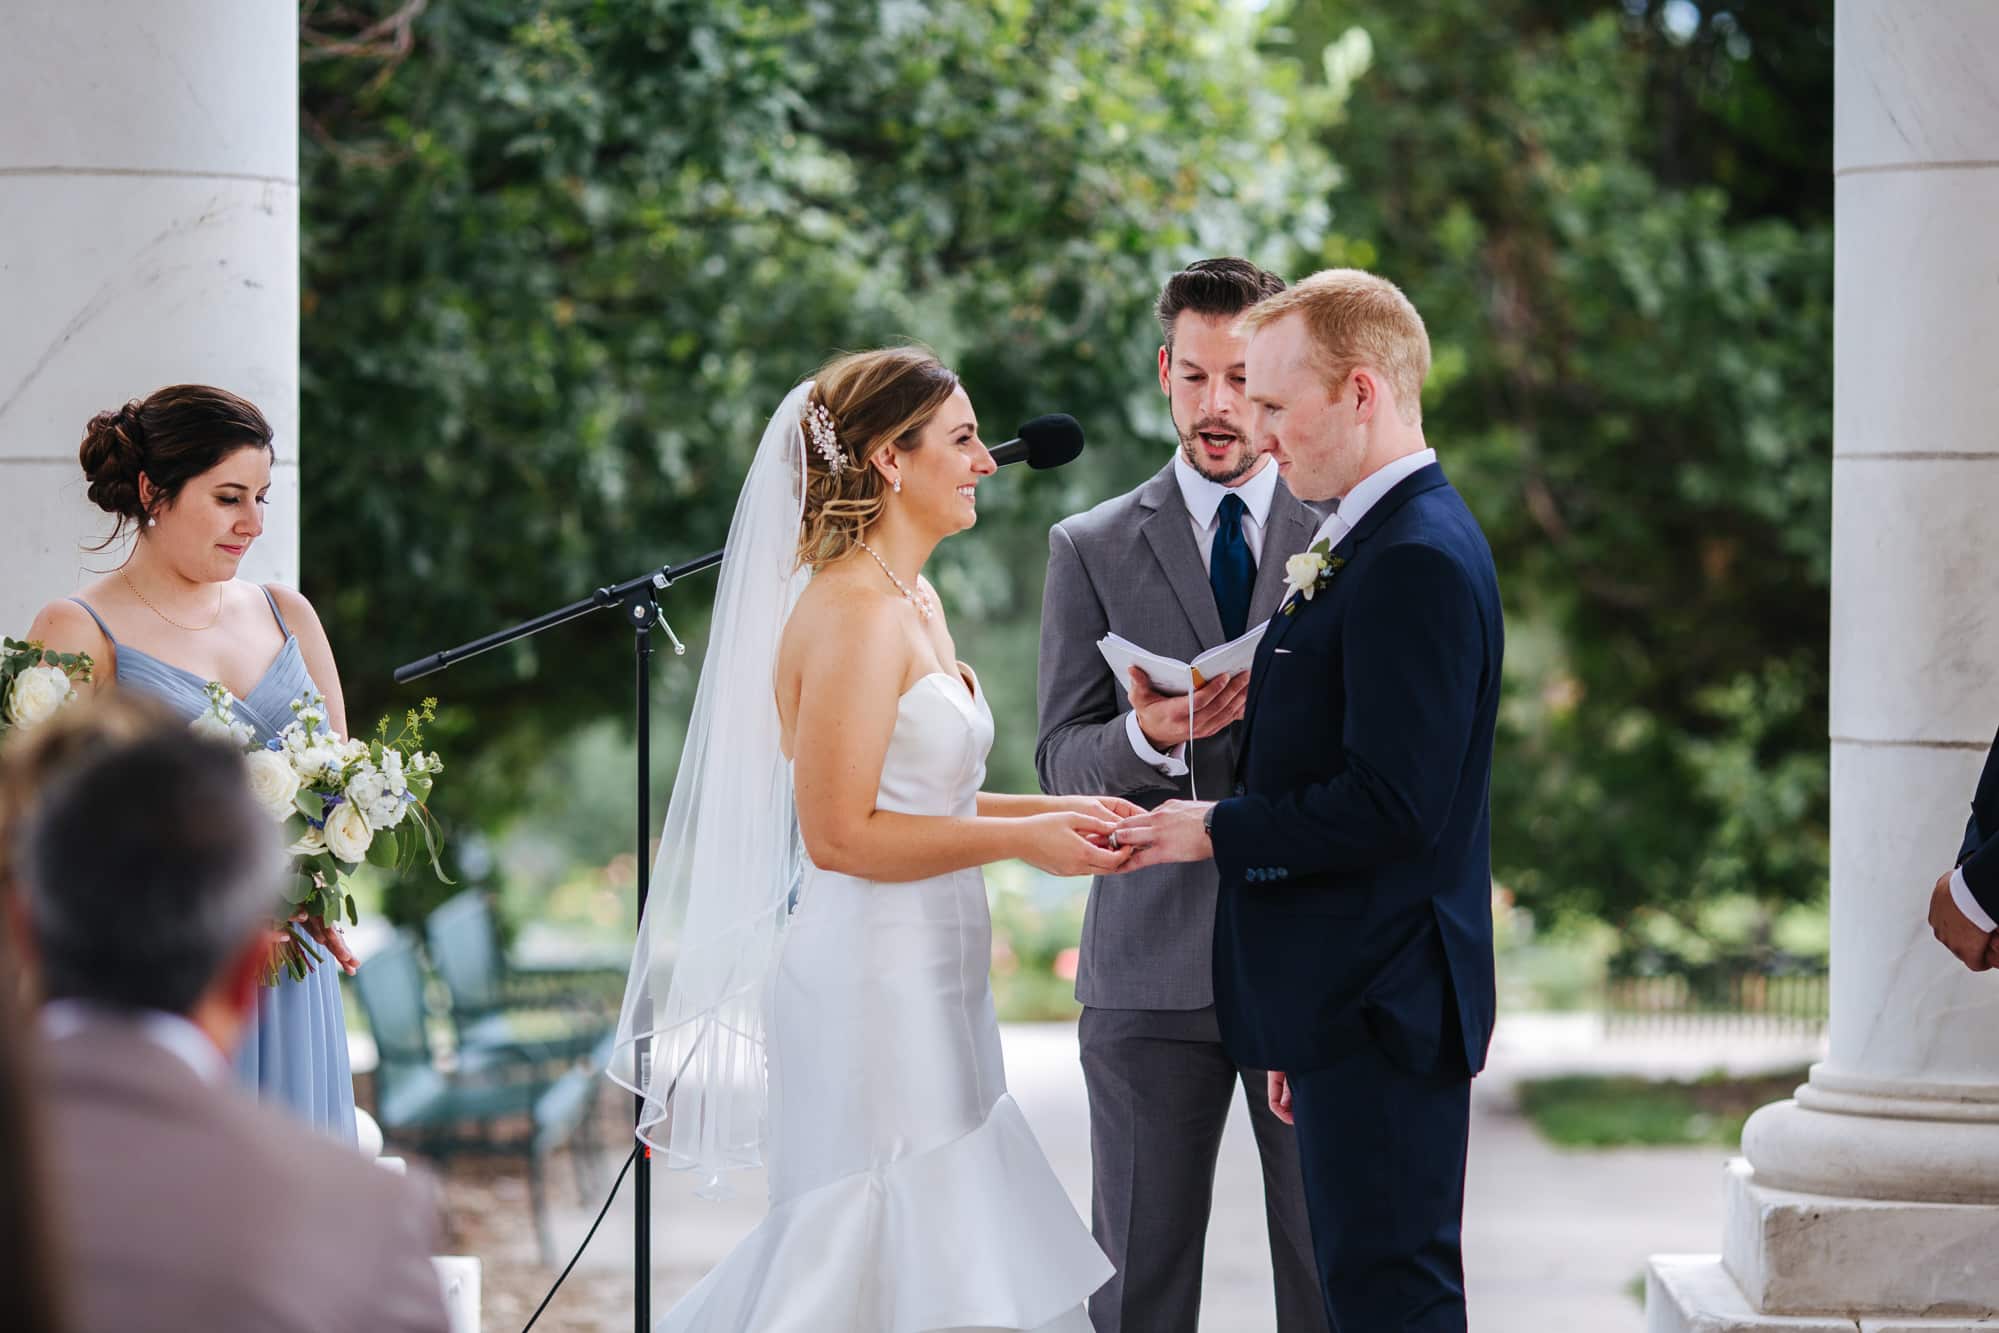 Cheeseman Park wedding, Cheeseman Park, Cheeseman Park denver, denver wedding venues, denver outdoor ceremony, bride and groom exchanging rings, best wedding photographers in denver